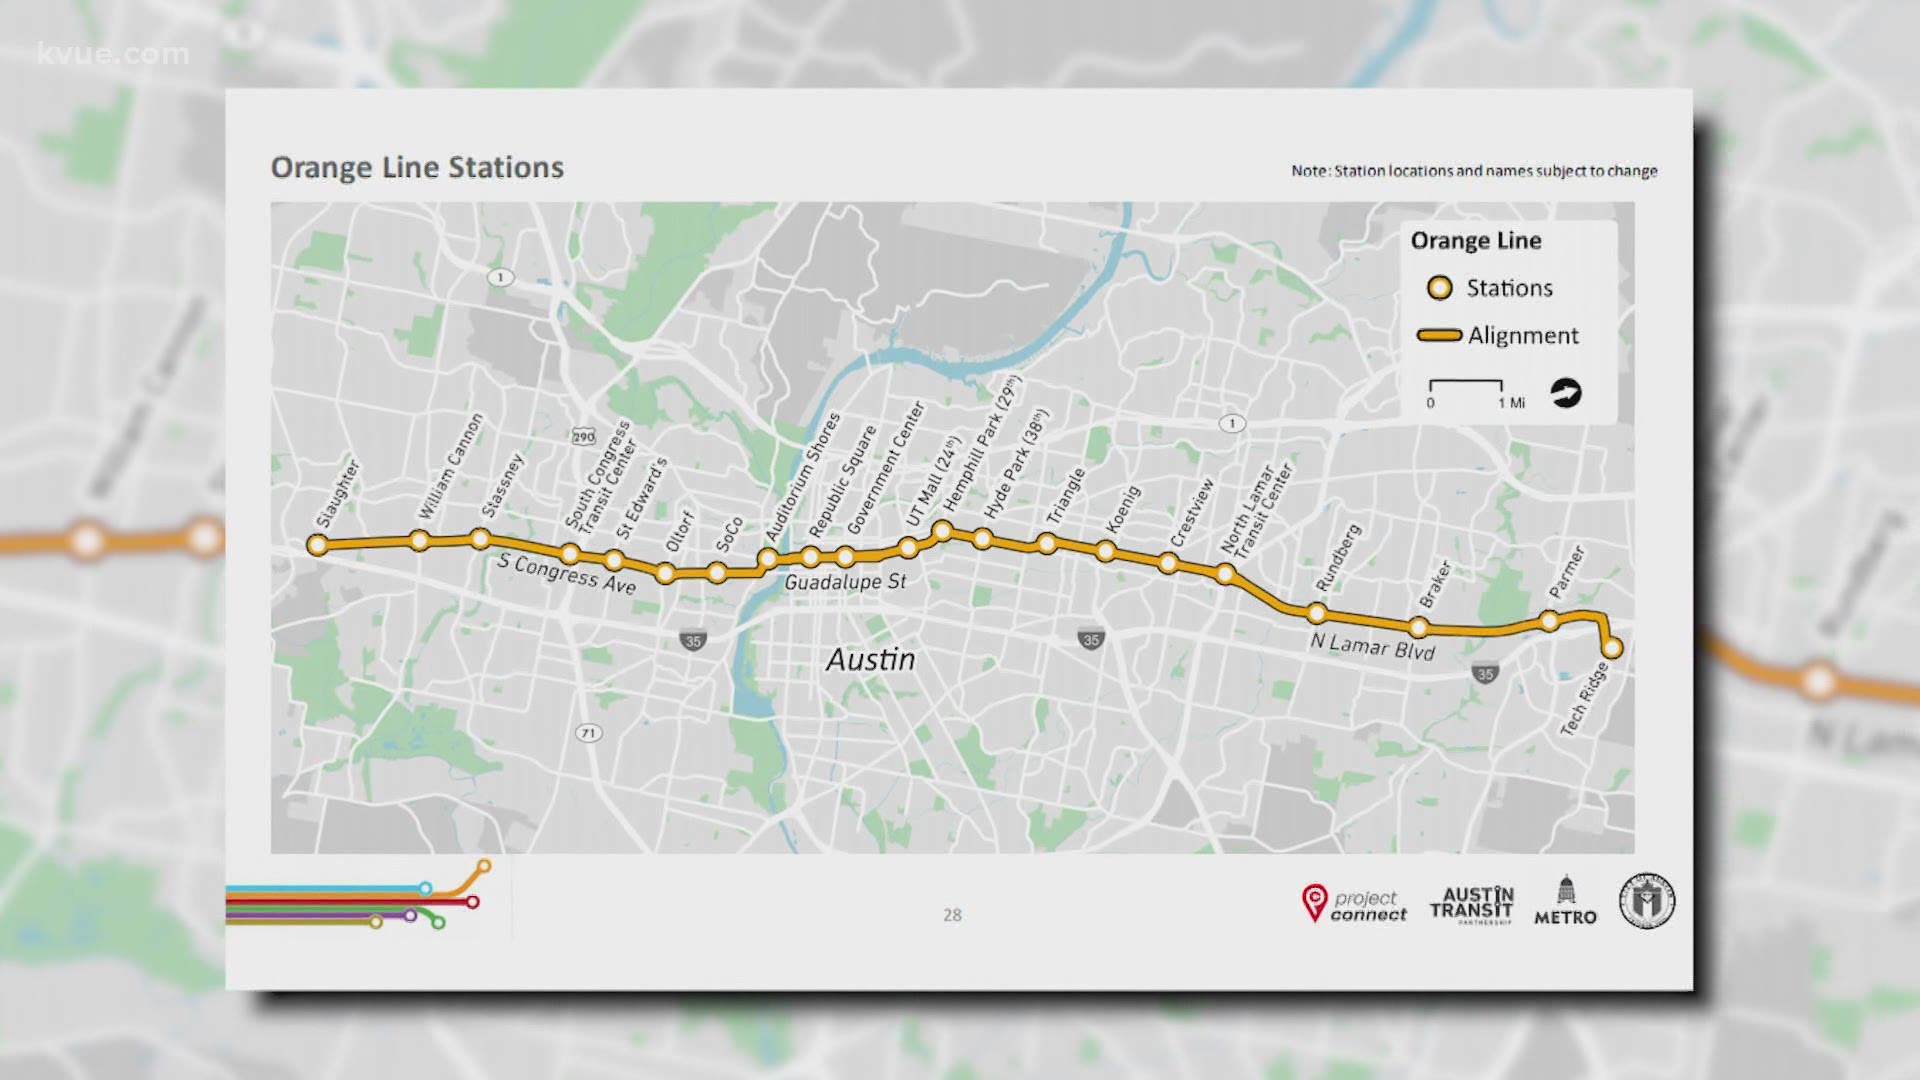 Austinities will be able to weigh in on the station location and design for Capital Metro's Project Connect.